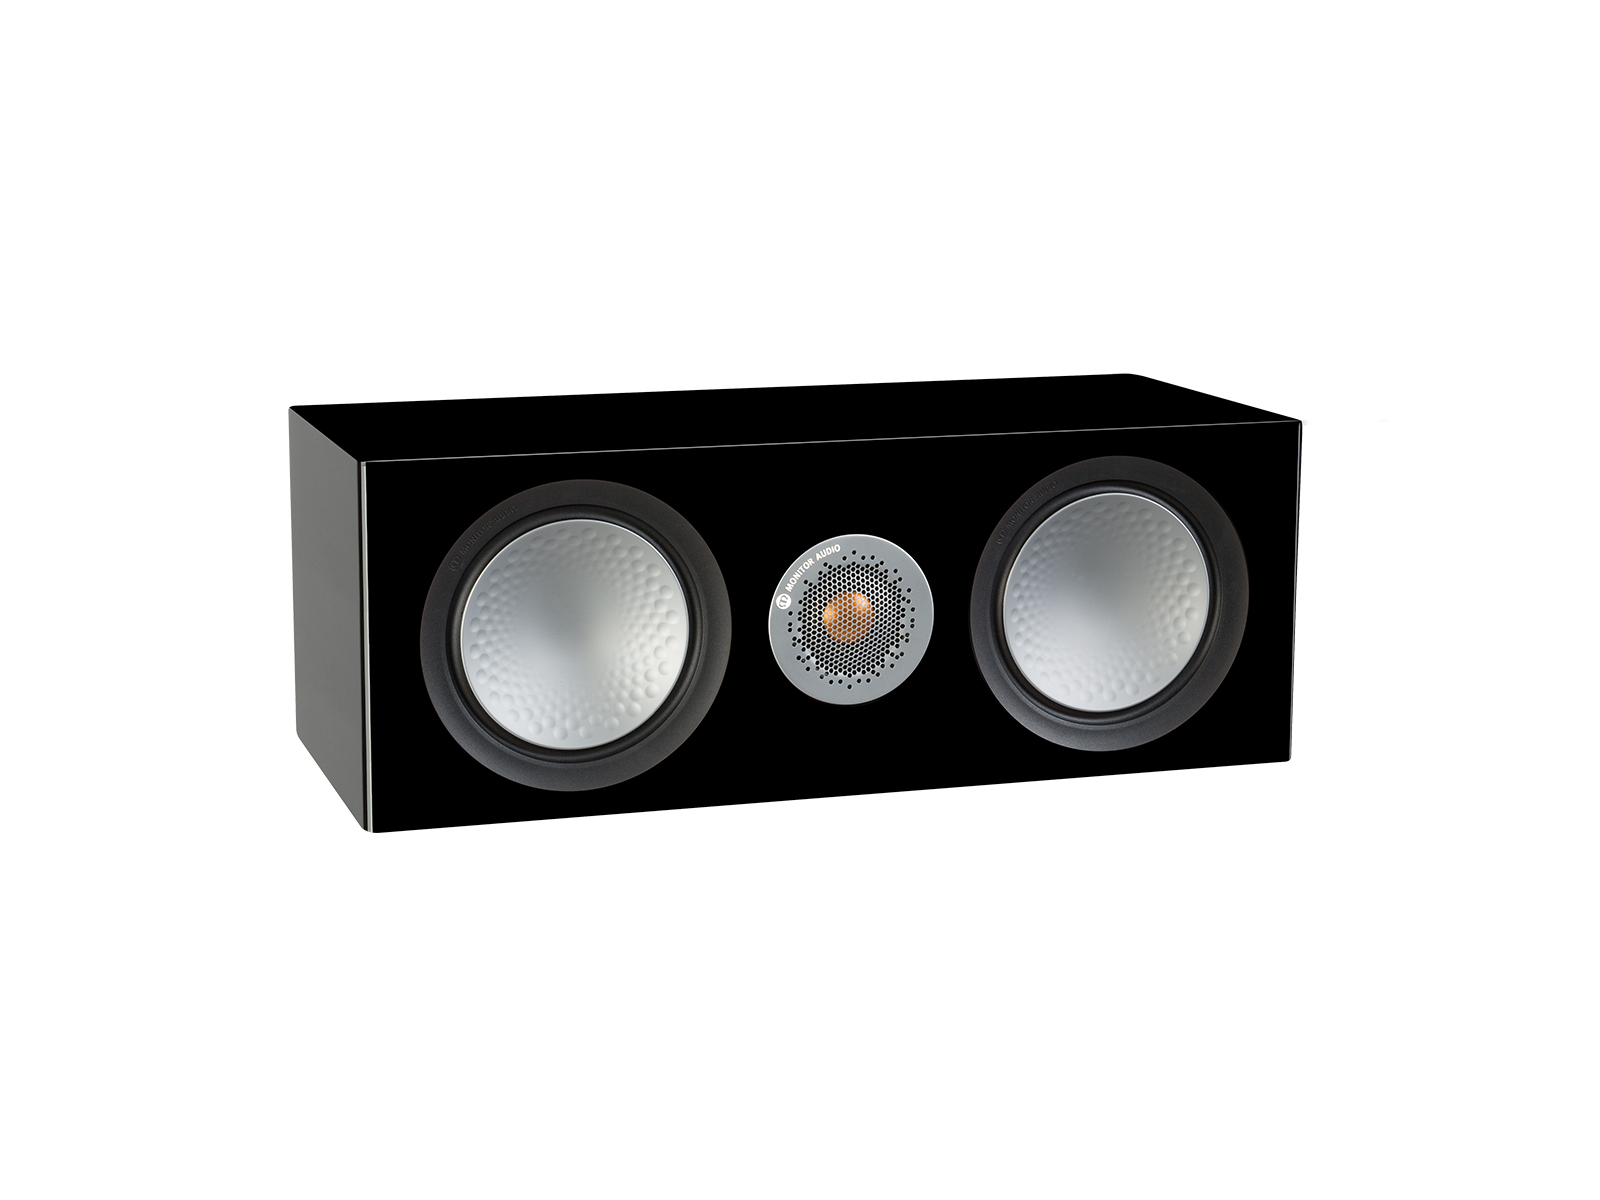 Silver C150, grille-less centre channel speakers, with a high gloss black finish.